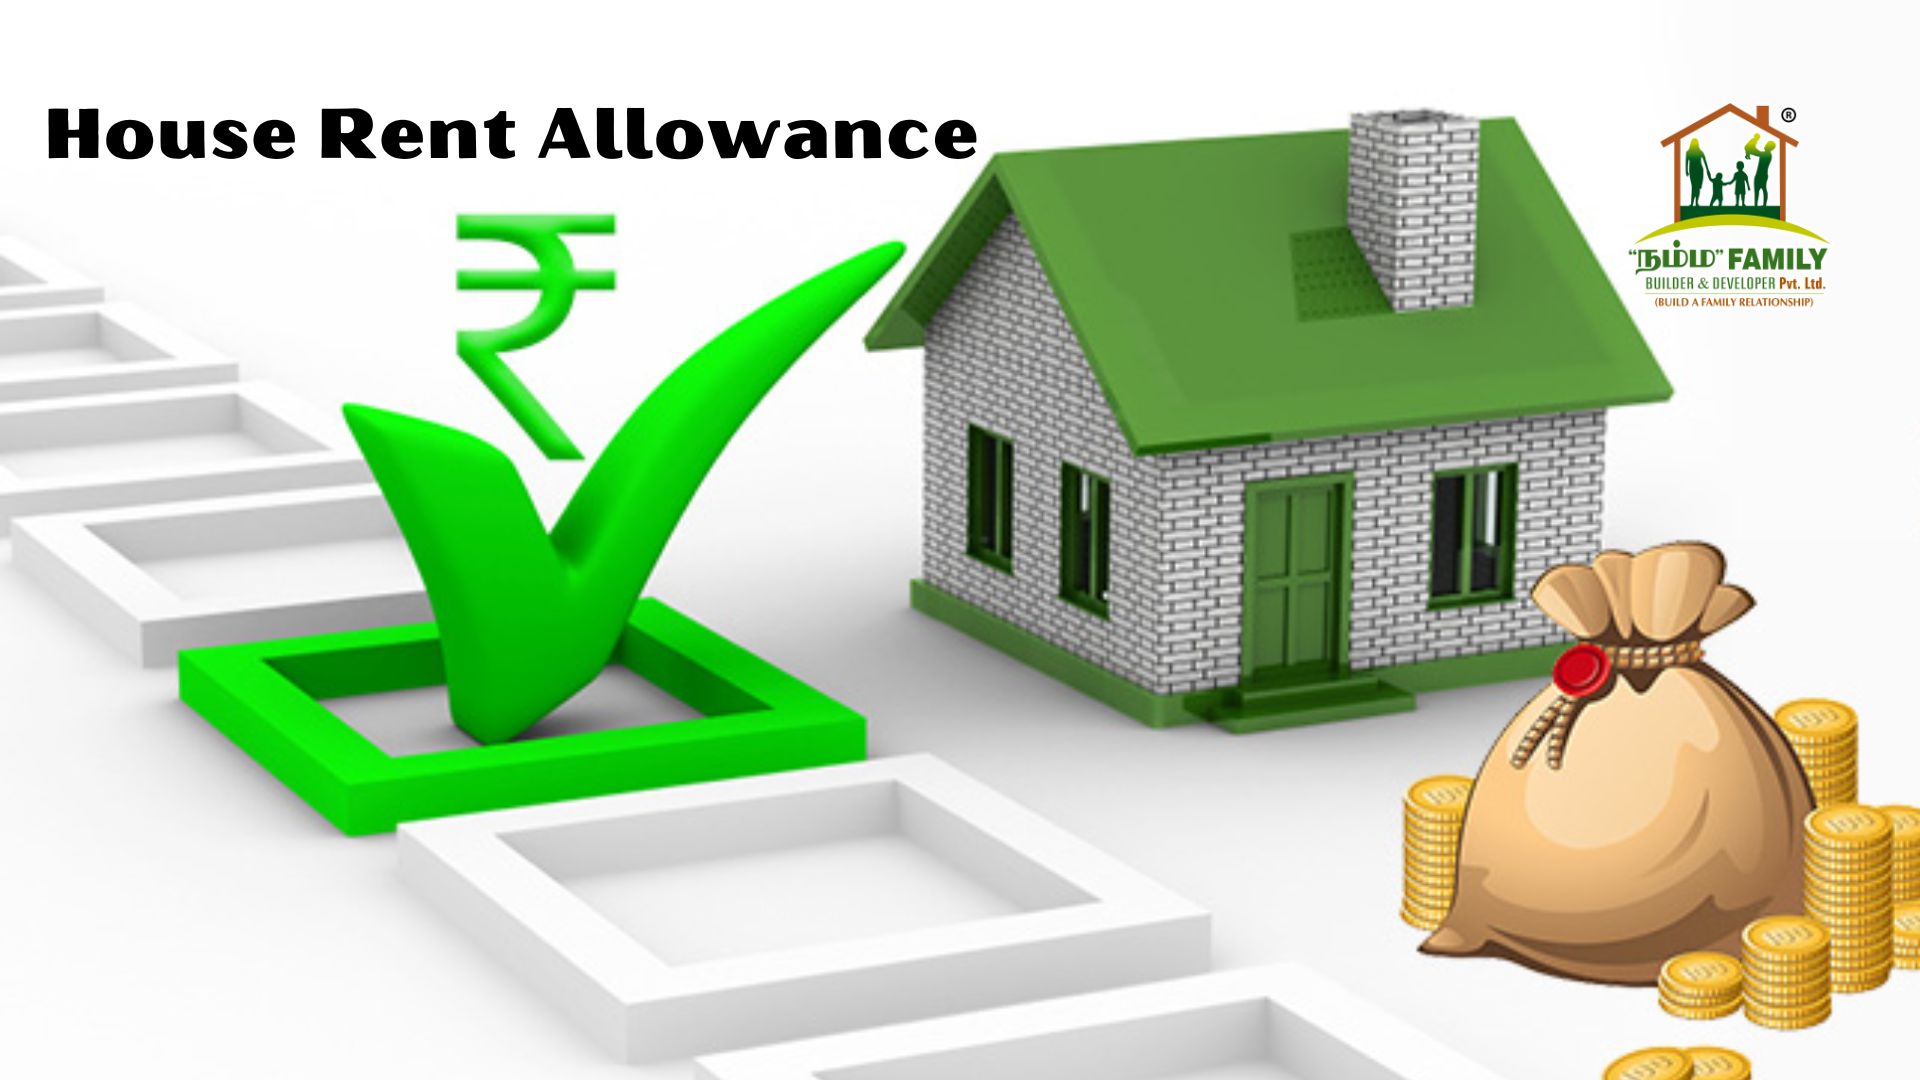 What Is HRA Full Form And How To Calculate? - Namma Family Builder